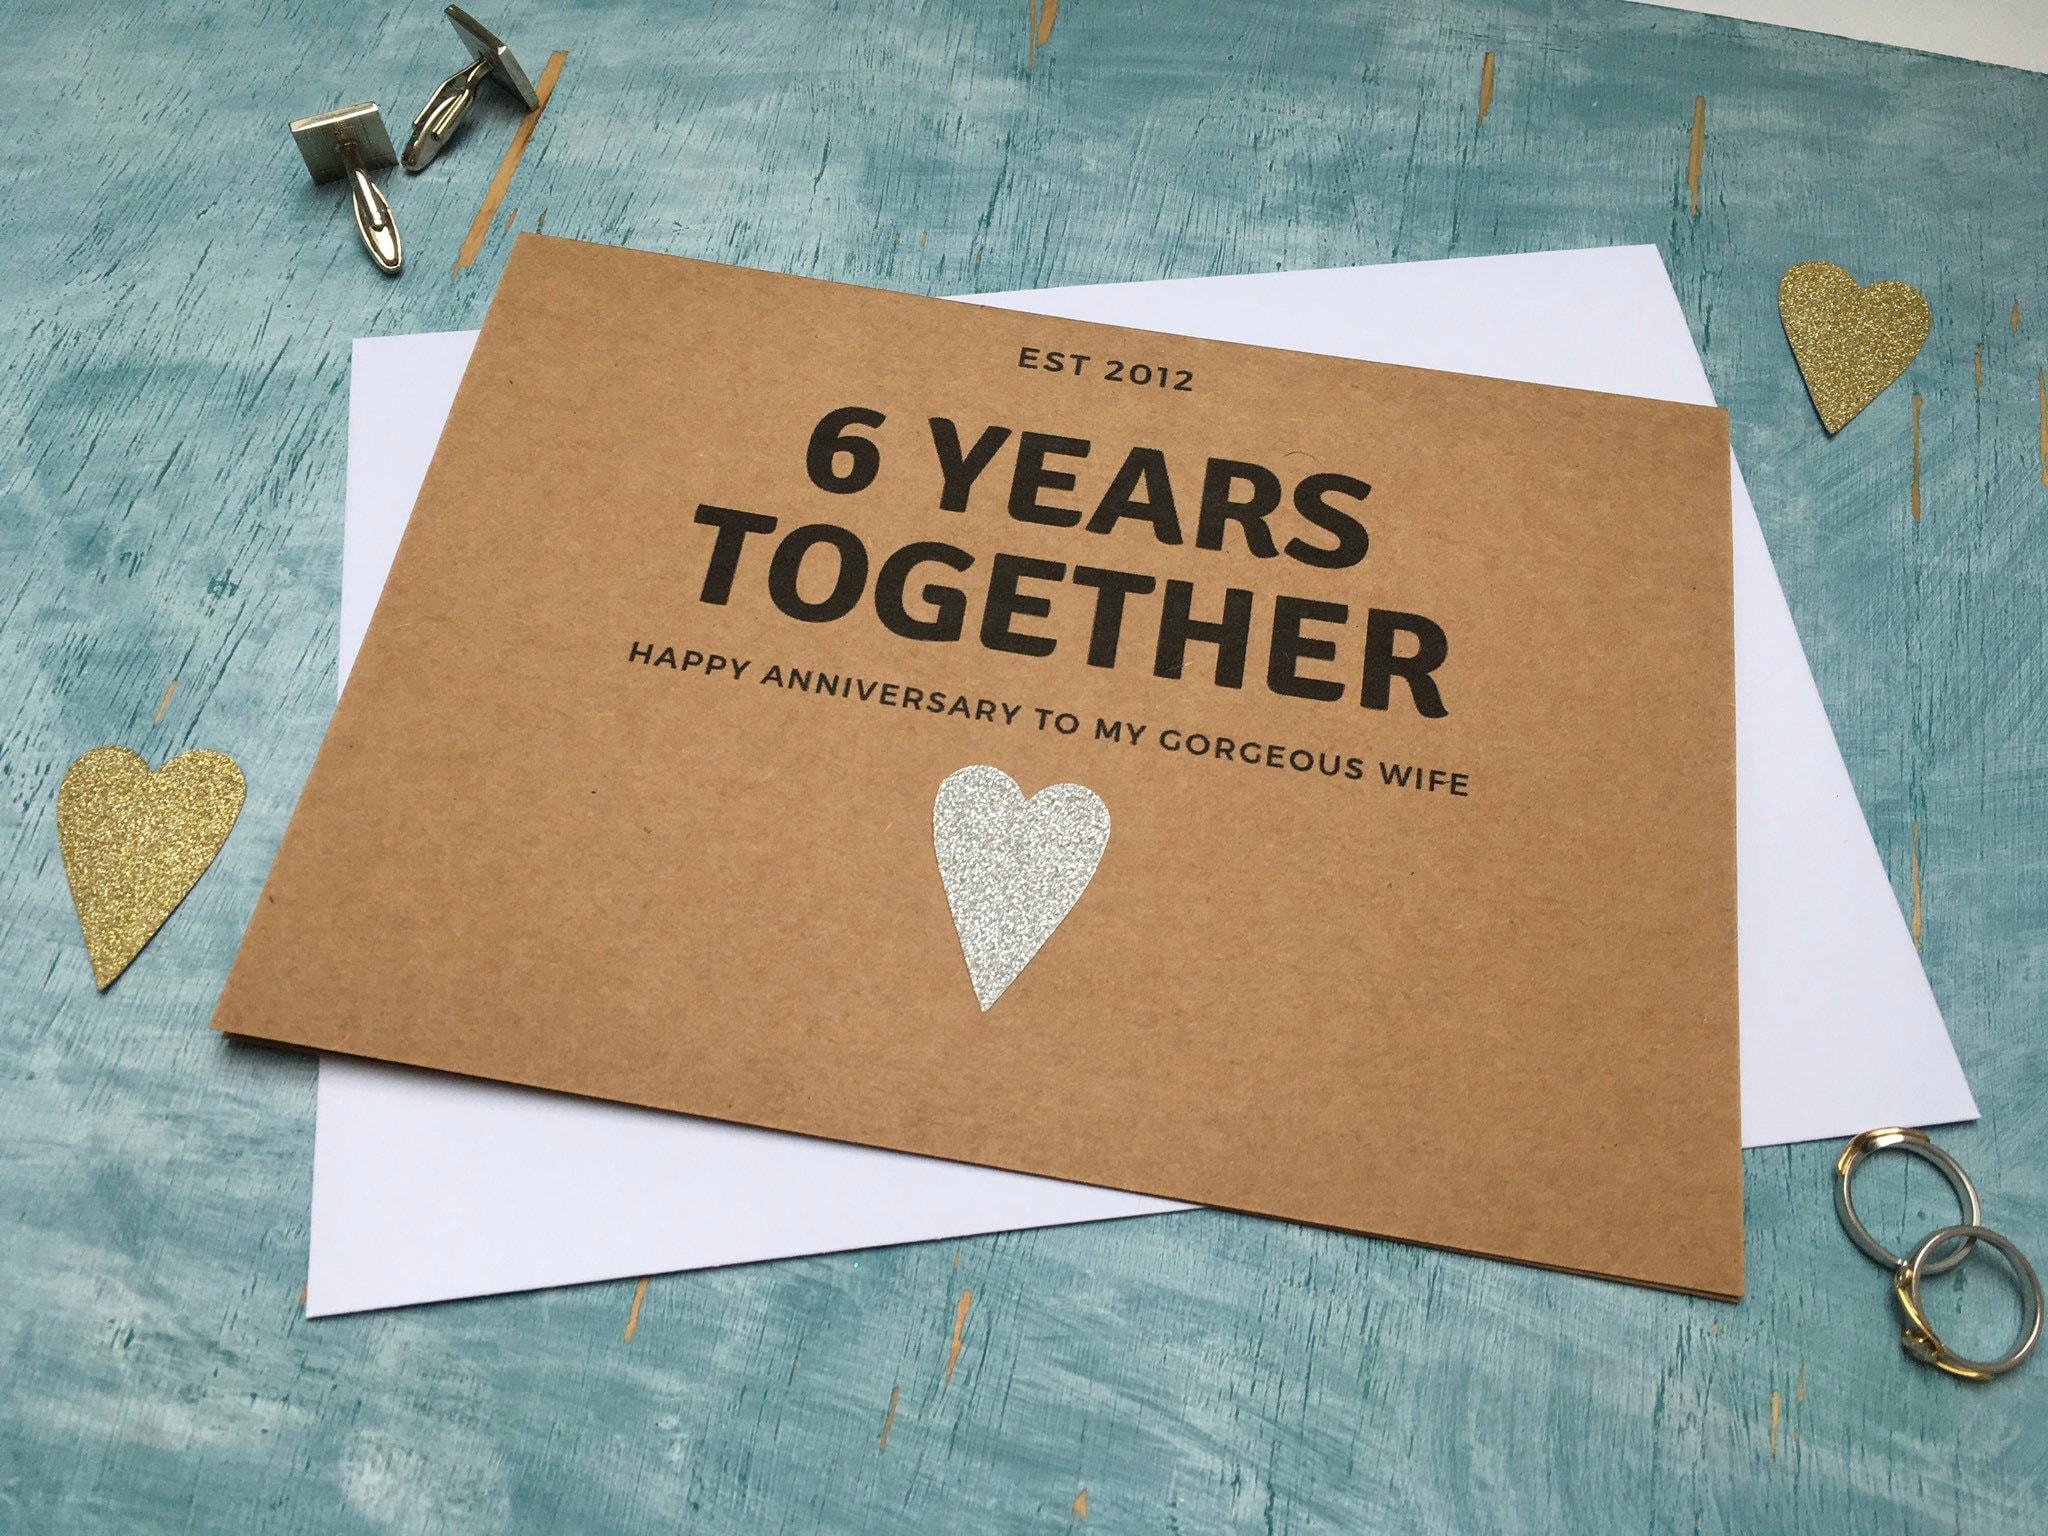 Our First Year Together Scrapbook Album, One Year Anniversary Gifts for  Boyfriend, 1 Year Anniversary Gift for Boyfriend, Paper Anniversary 